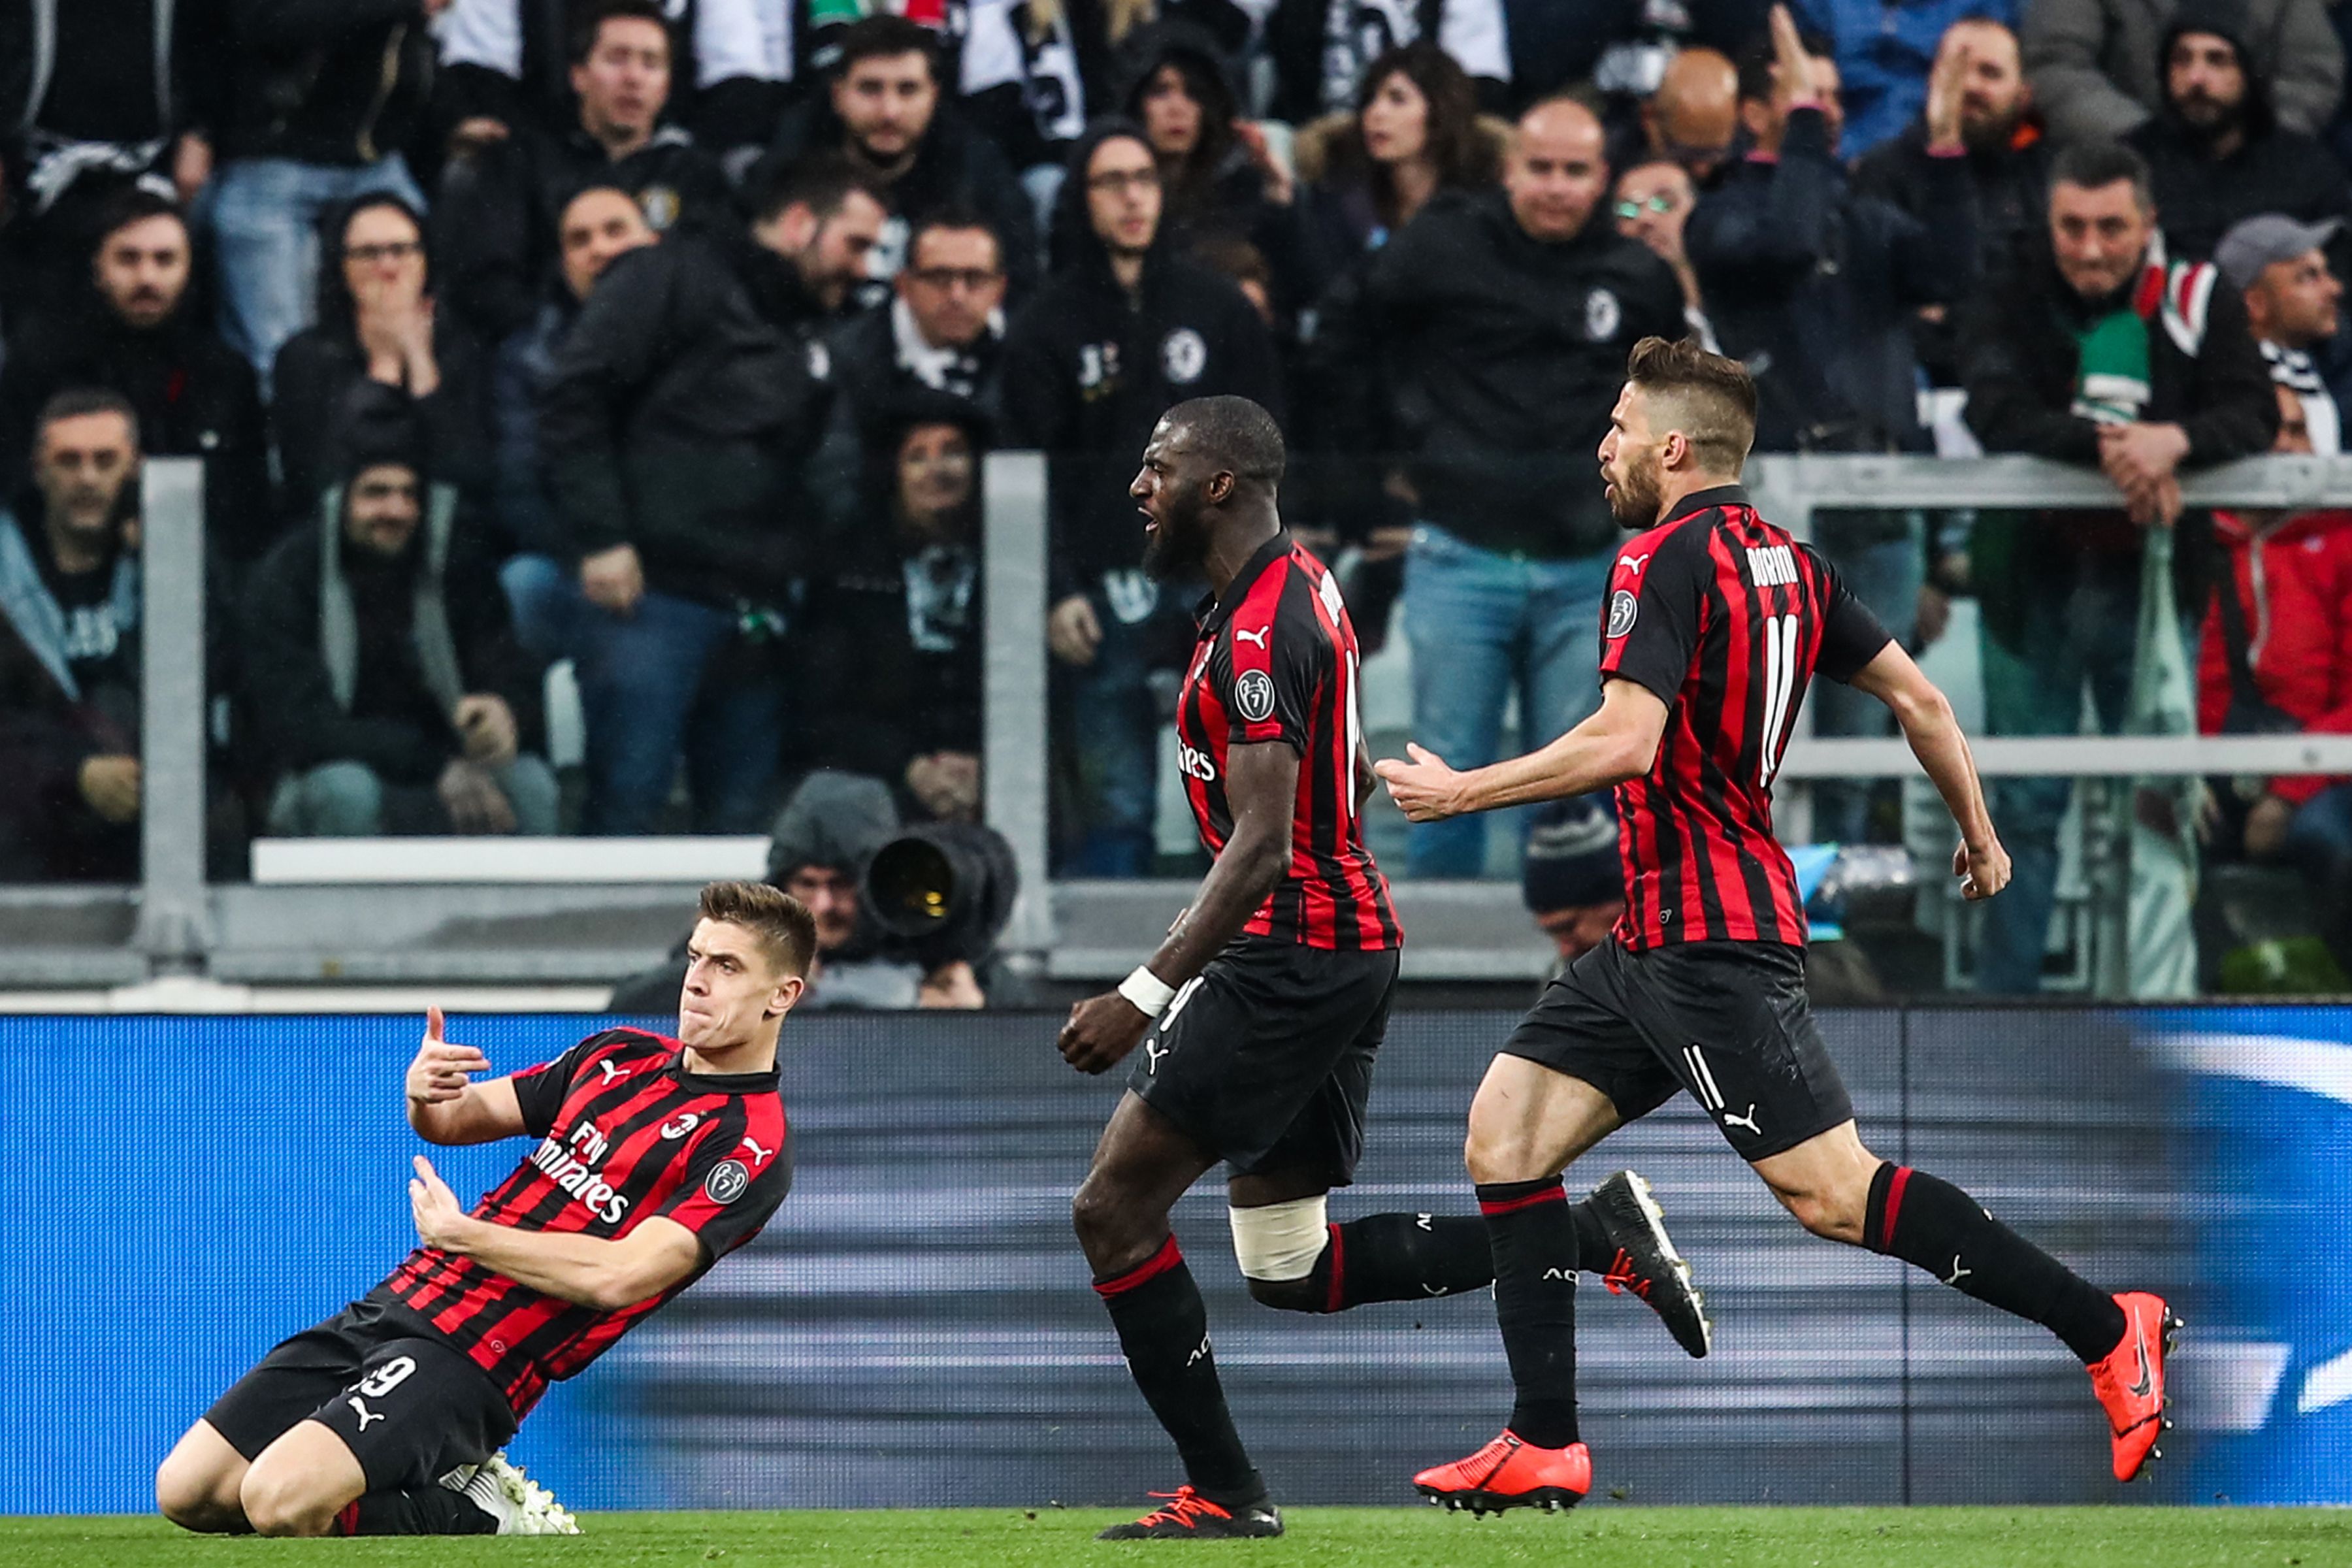 AC Milan's Polish forward Krzysztof Piatek (L) celebrates after opening the scoring during the Italian Serie A football match Juventus vs AC Milan on April 6, 2019 at the Juventus stadium in Turin. (Photo by Isabella BONOTTO / AFP) (Photo credit should read ISABELLA BONOTTO/AFP/Getty Images)